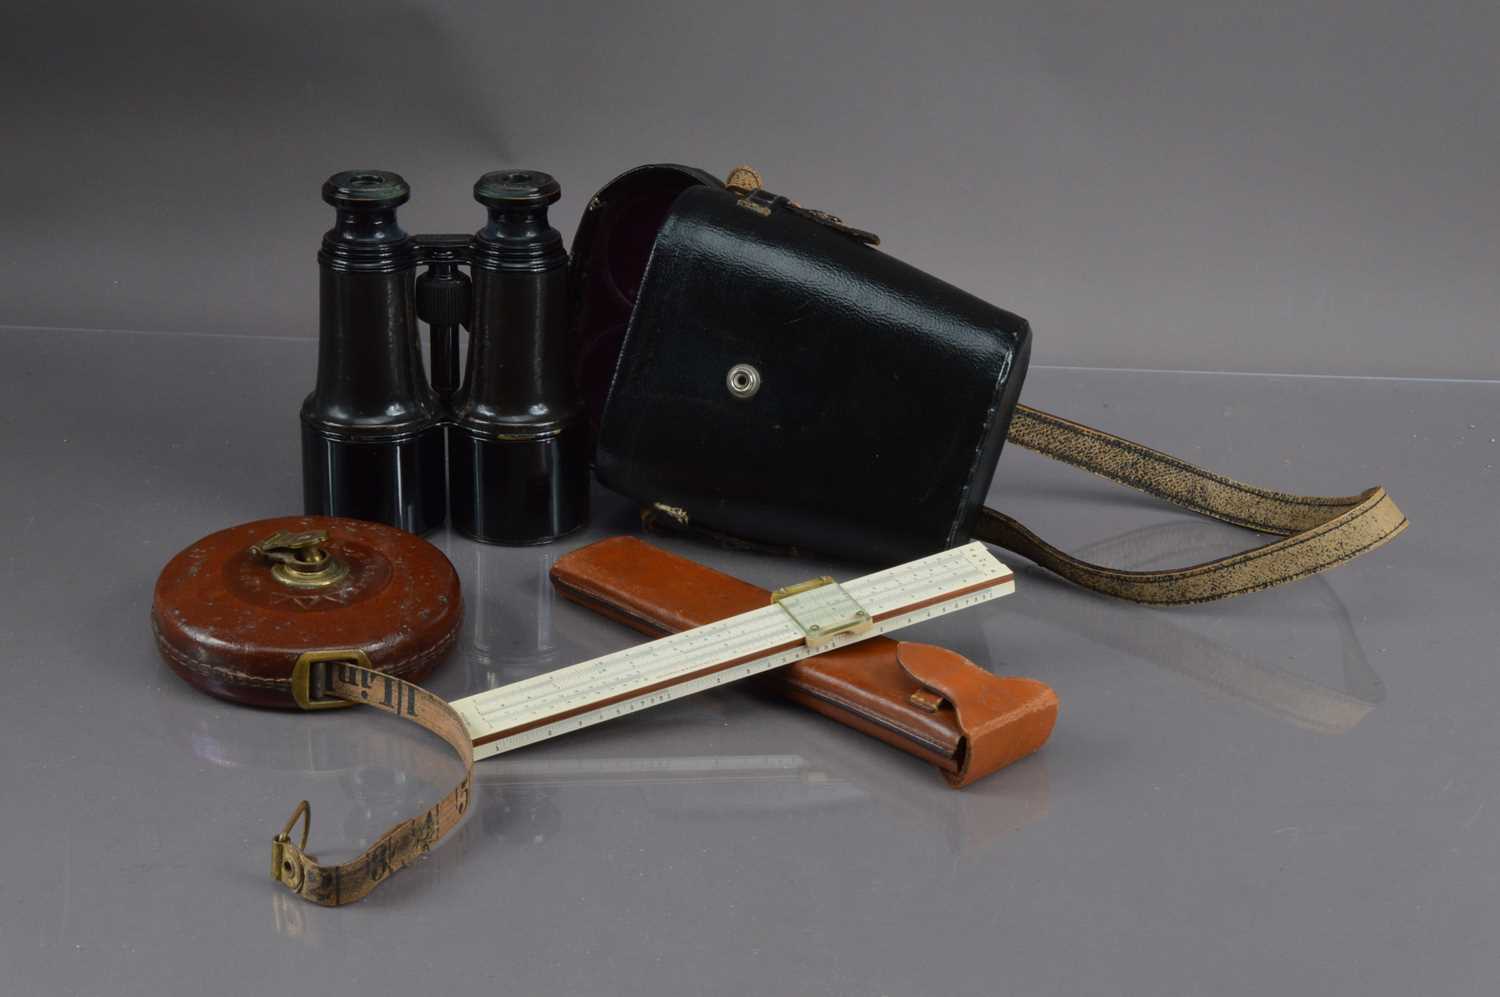 A pair of binoculars and a surveyor's tape measure and a slide rule,